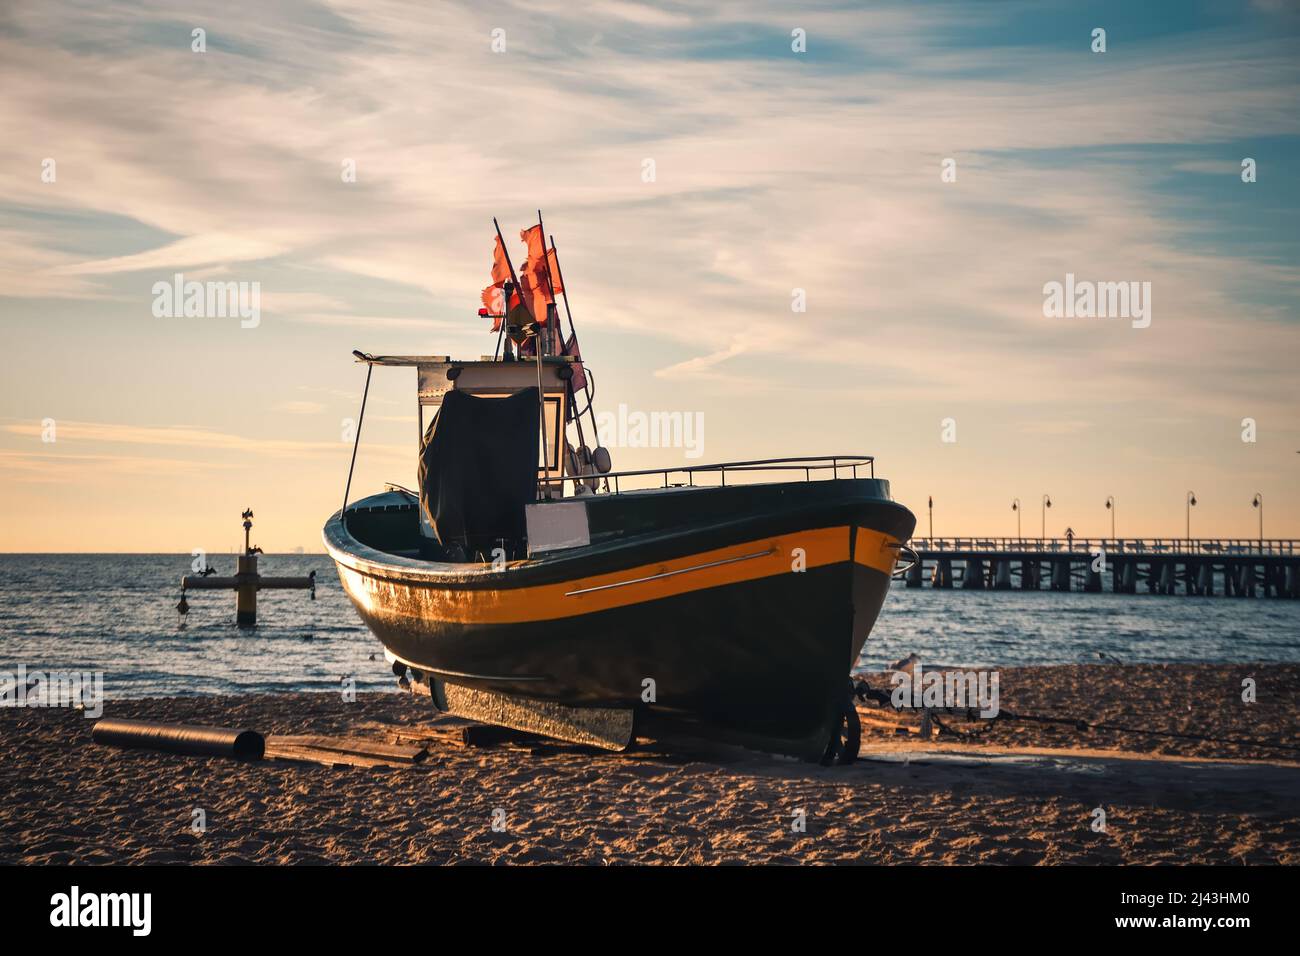 Beautiful morning view at the Polish seaside in Gdynia. Ship on a sandy beach in the morning. Stock Photo